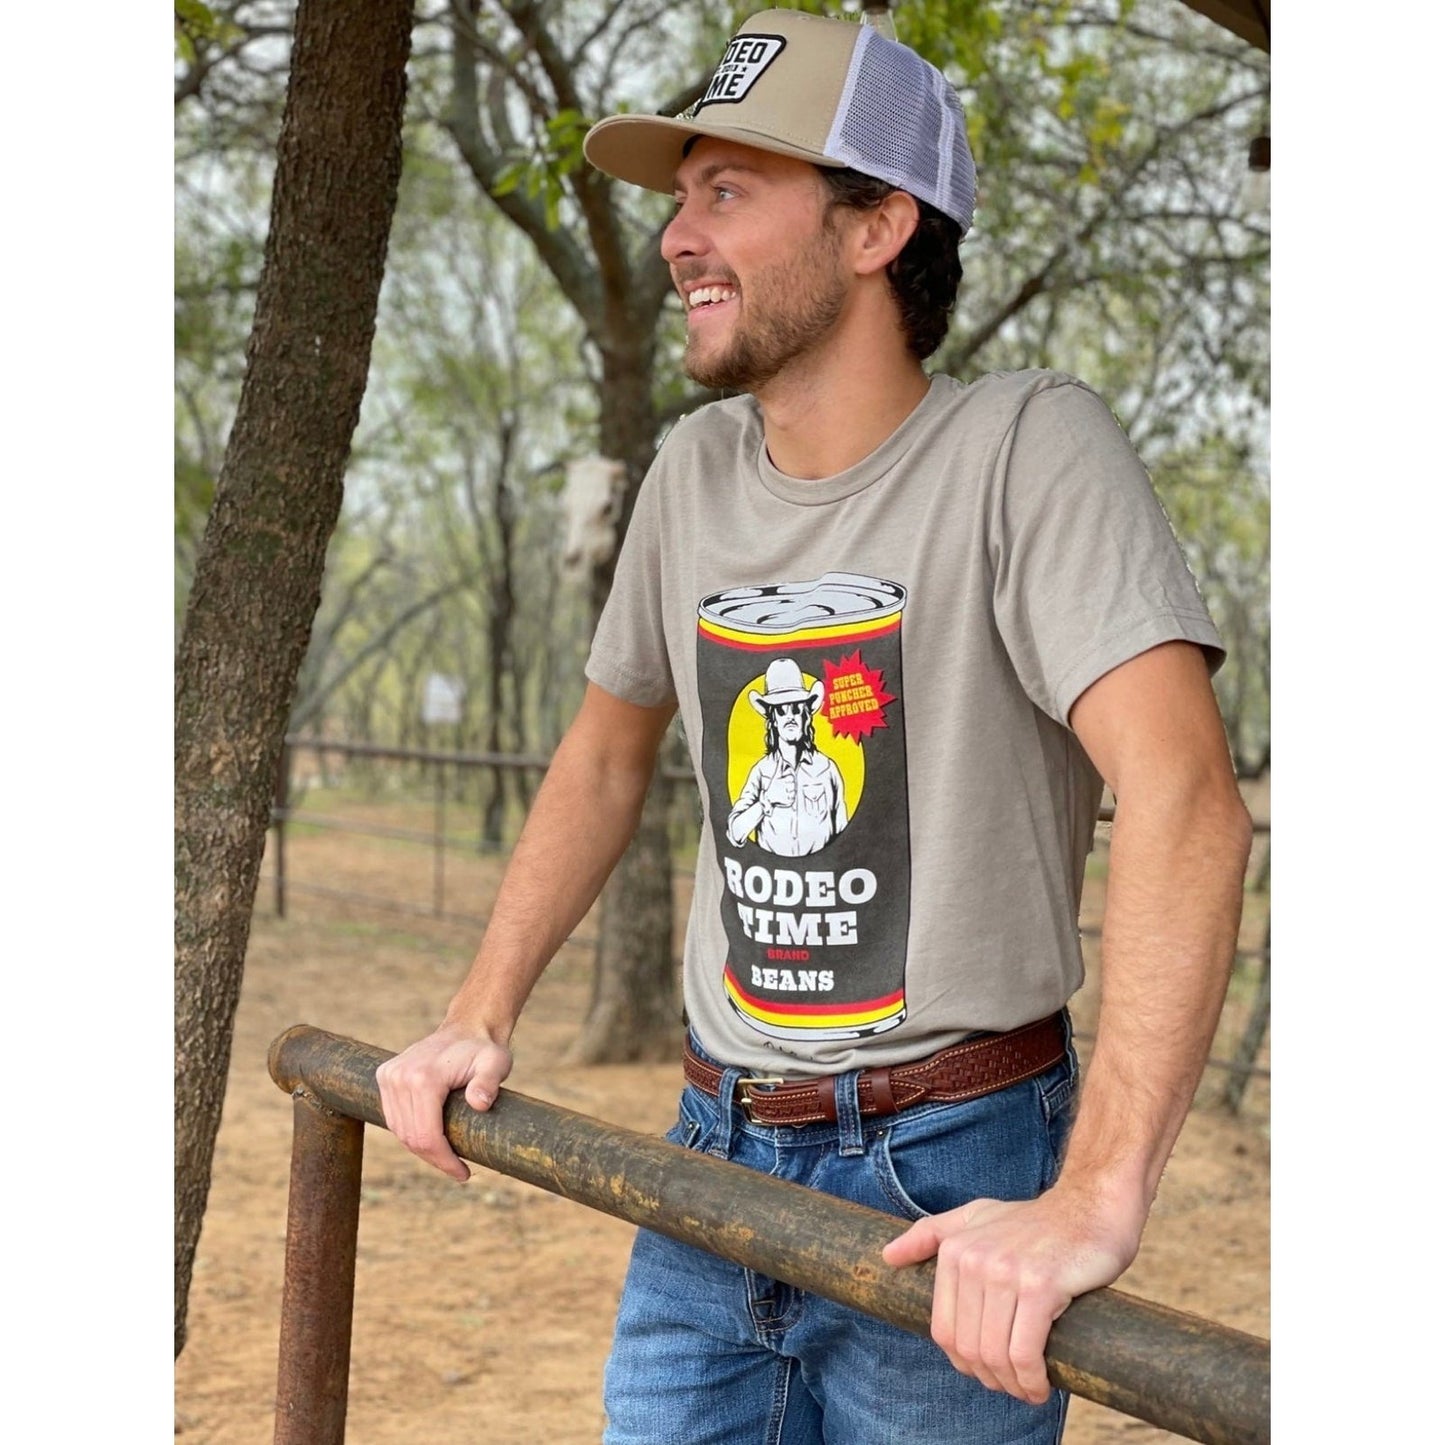 Dale Brisby Unisex T-Shirt Rodeo Time Beans T-119 - Dale Brisby